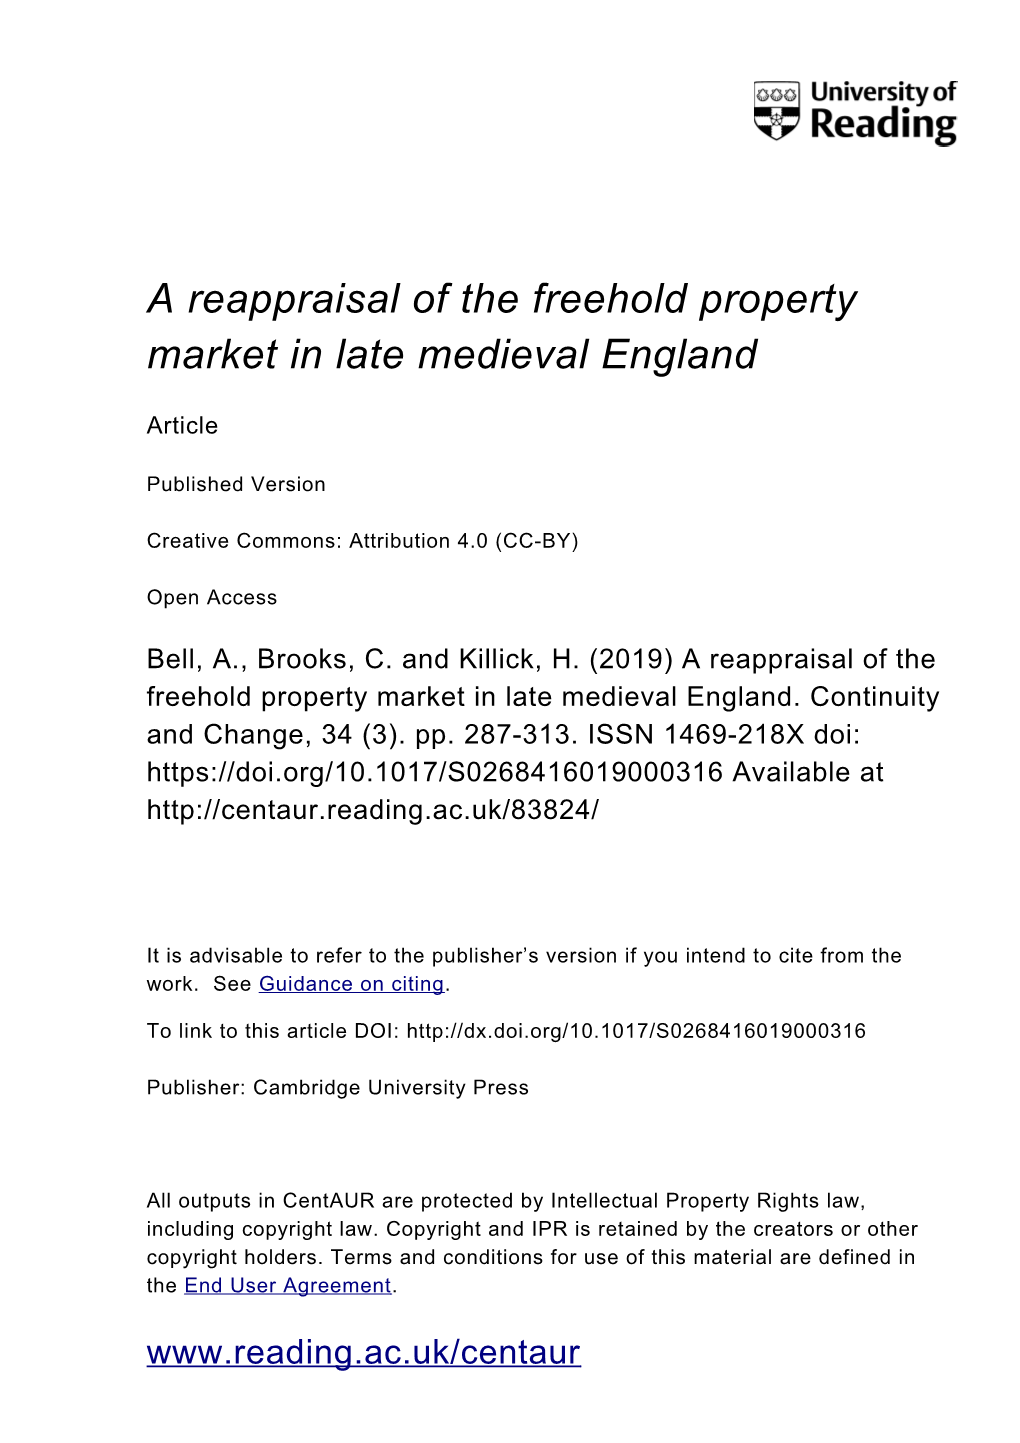 A Reappraisal of the Freehold Property Market in Late Medieval England